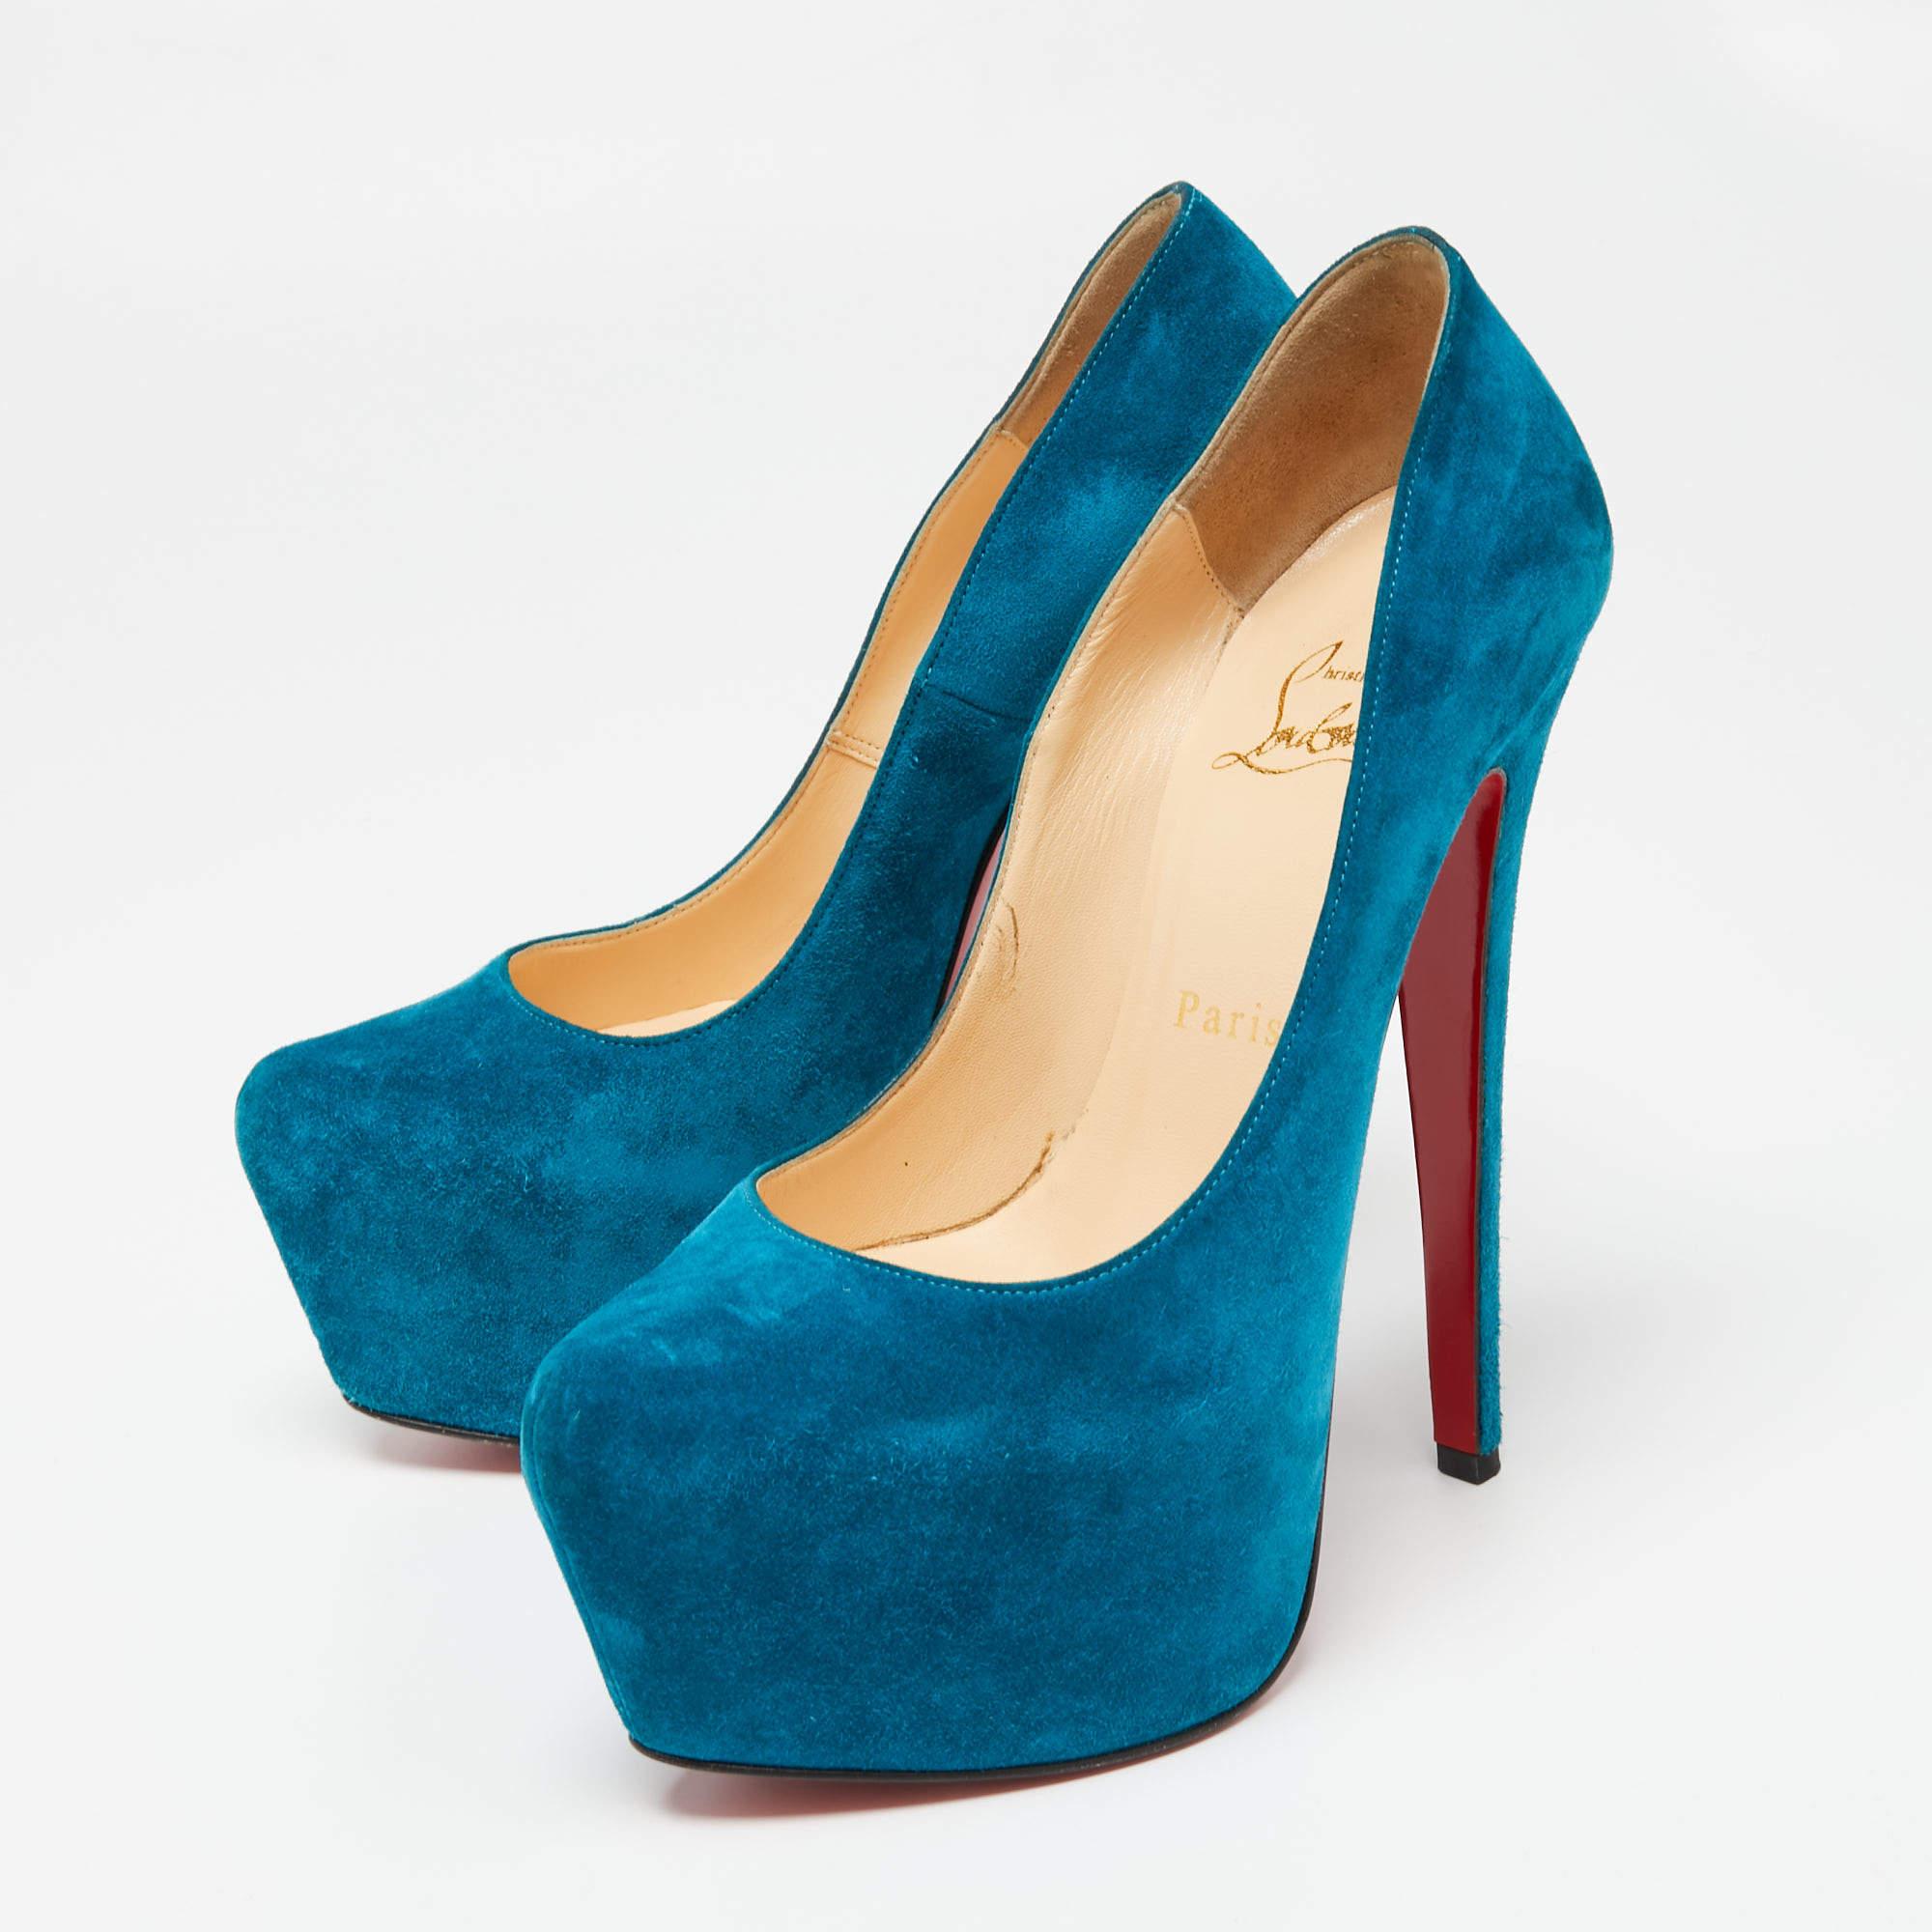 Christian Louboutin Teal Blue Suede Daffodile Platform Pumps Size 36.5 For Sale 2